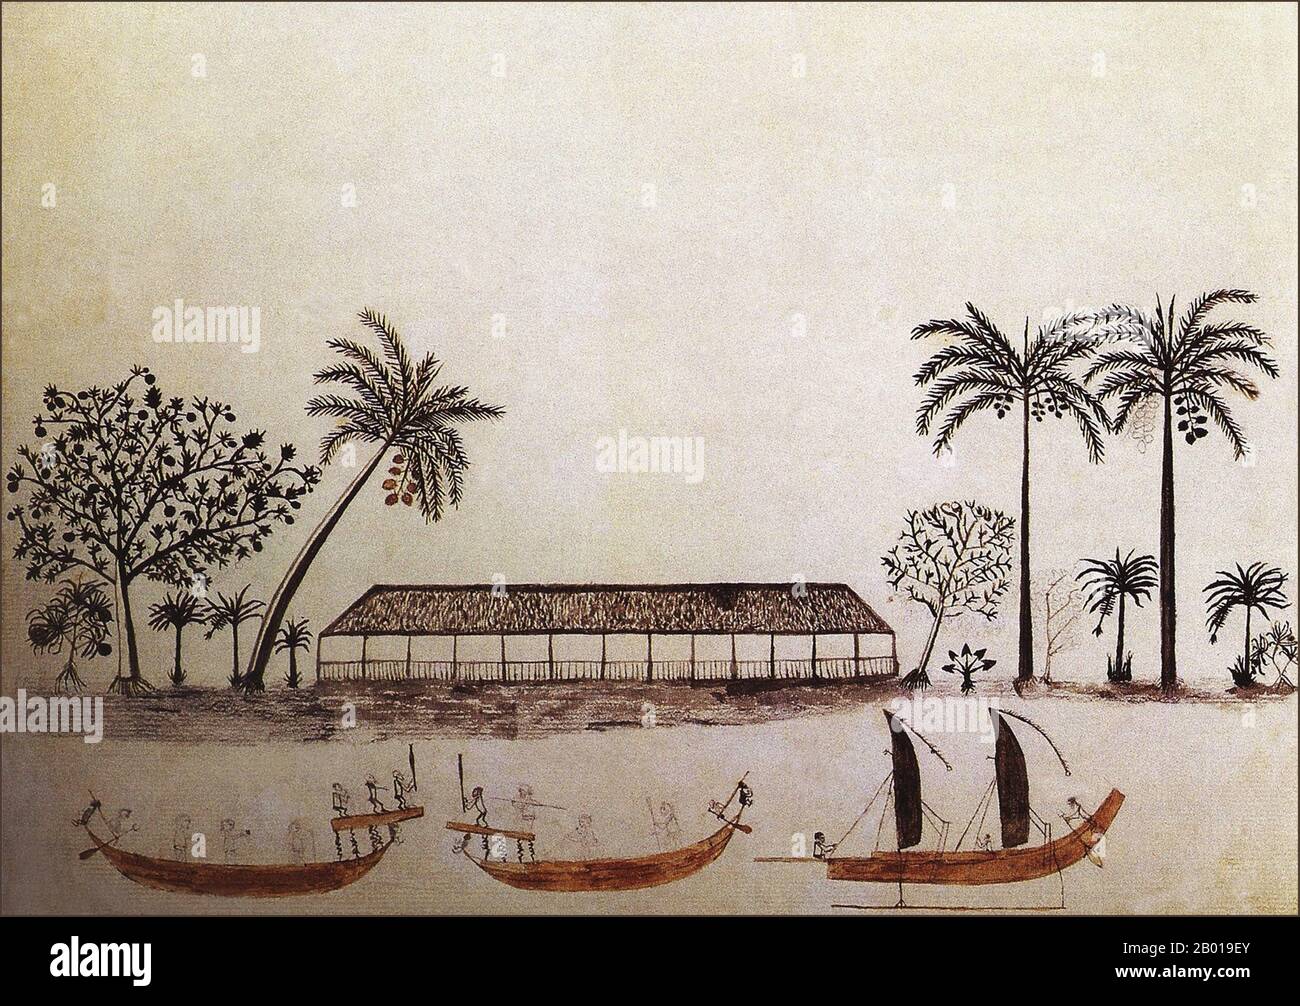 Tahiti: 'Canoes at Tahiti'. Drawing by Tupaia (c. 1725 - 20 December 1770), c. 1769.  Tupaia, a native of Raieatea, fled to Tahiti  to escape attacking forces from Bora Bora island. A man of clear intelligence, he acted as intermediary, translator and explicator of Polynesian society for visiting European vessels. On Cook's arrival in 1769, Tupaia went on board Cook's voyage to New Zealand, Australia, and Java, where Tupaia eventually died after falling ill. Stock Photo